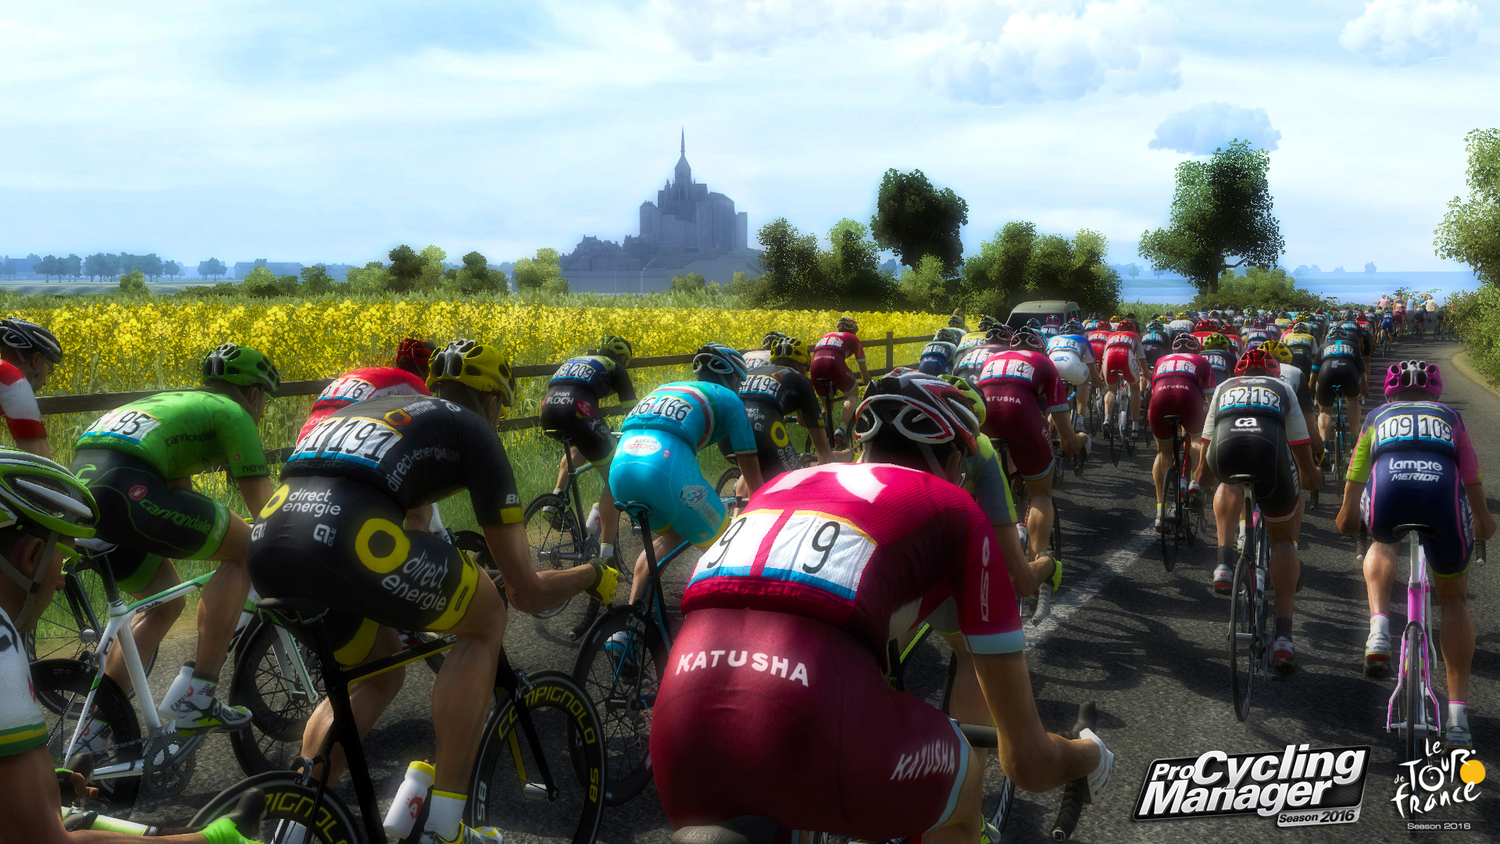 Pro Cycling Manager 2013 PC Game Free Download Direct Link